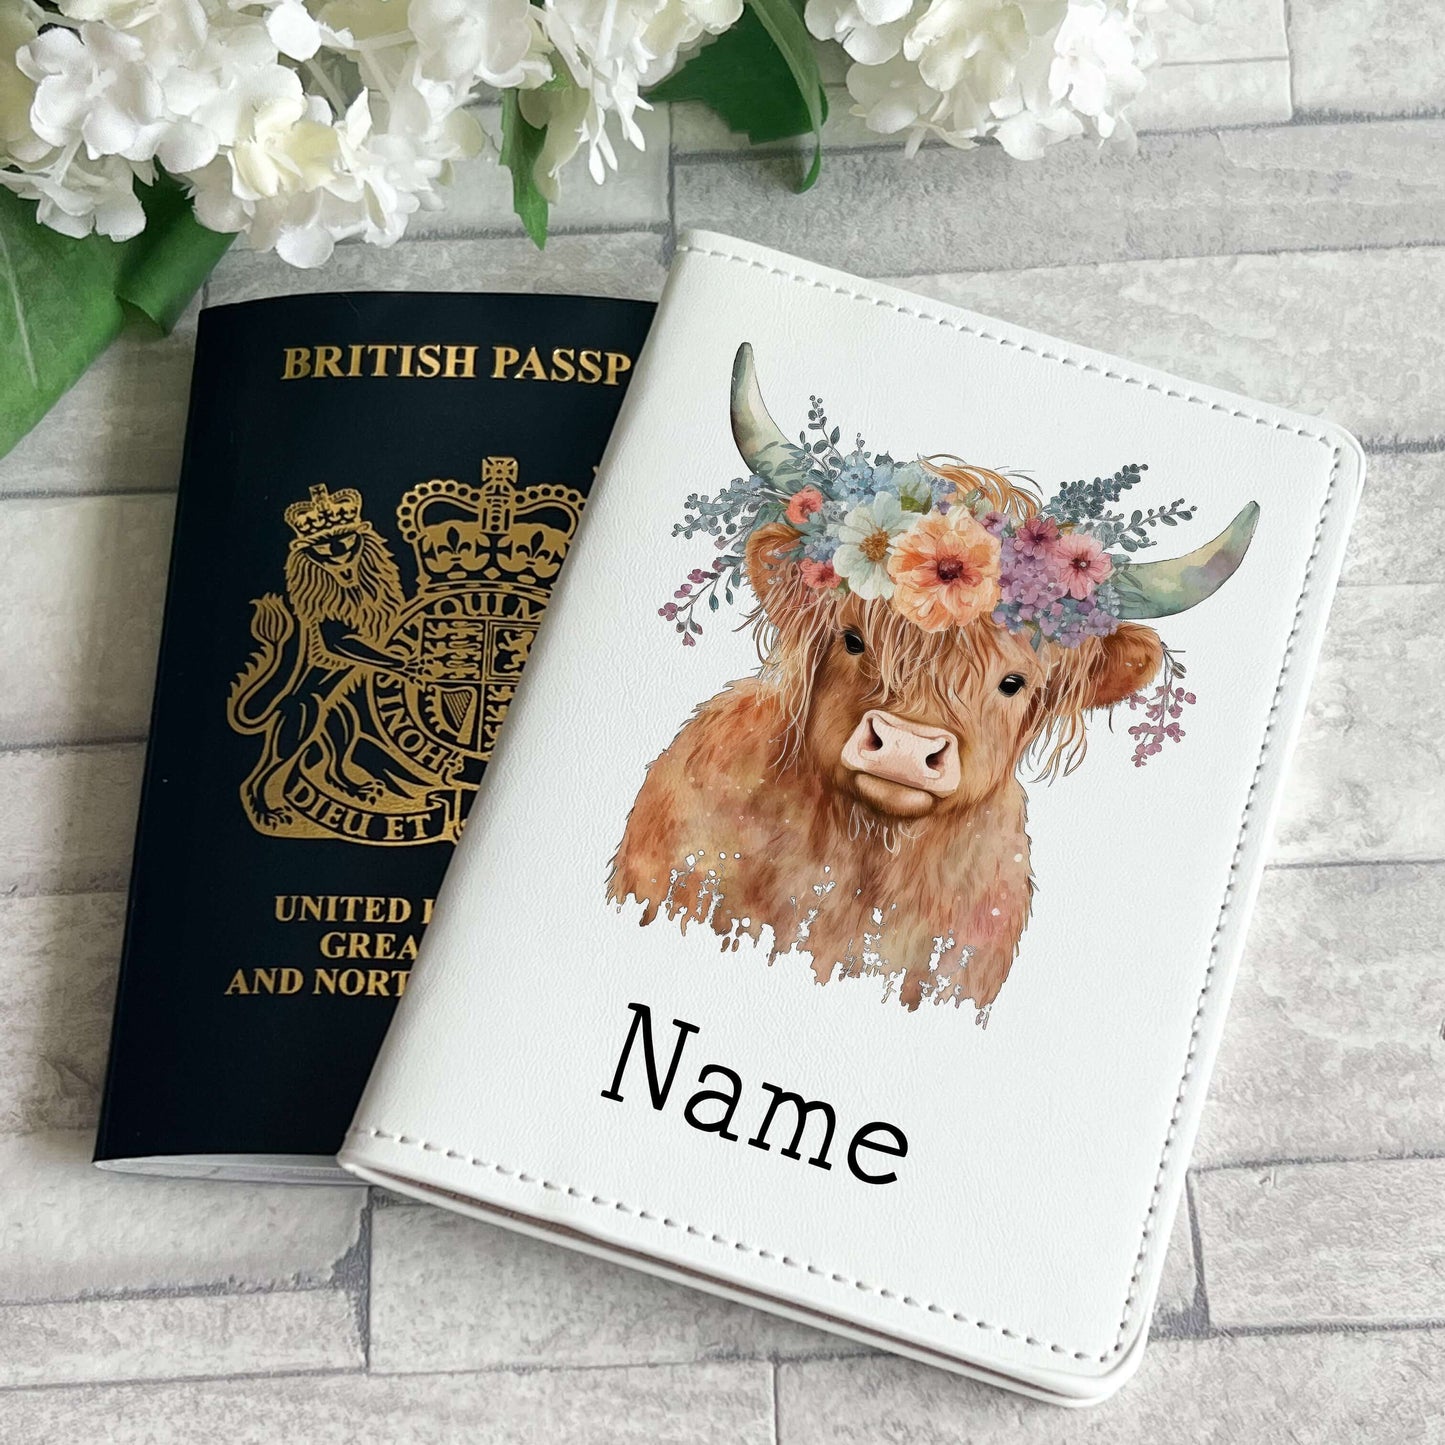 Highland cow passport cover - Moose and goose gifts - Travel holiday cover - Personalised gift - M&G Gifts